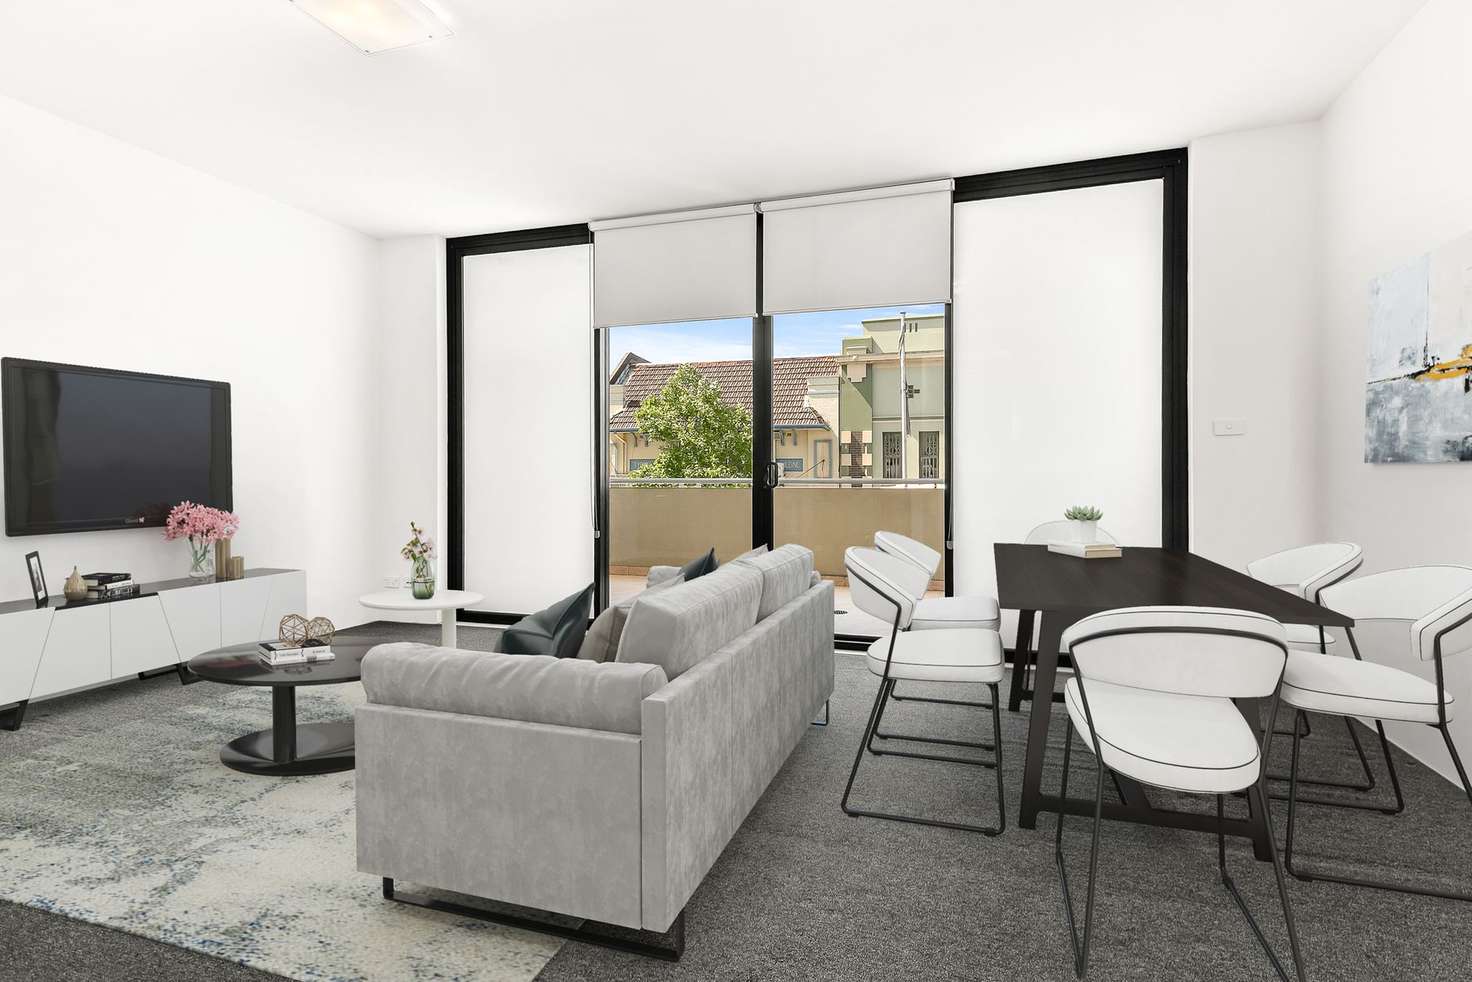 Main view of Homely apartment listing, 3/240 Marrickville ln, Marrickville NSW 2204